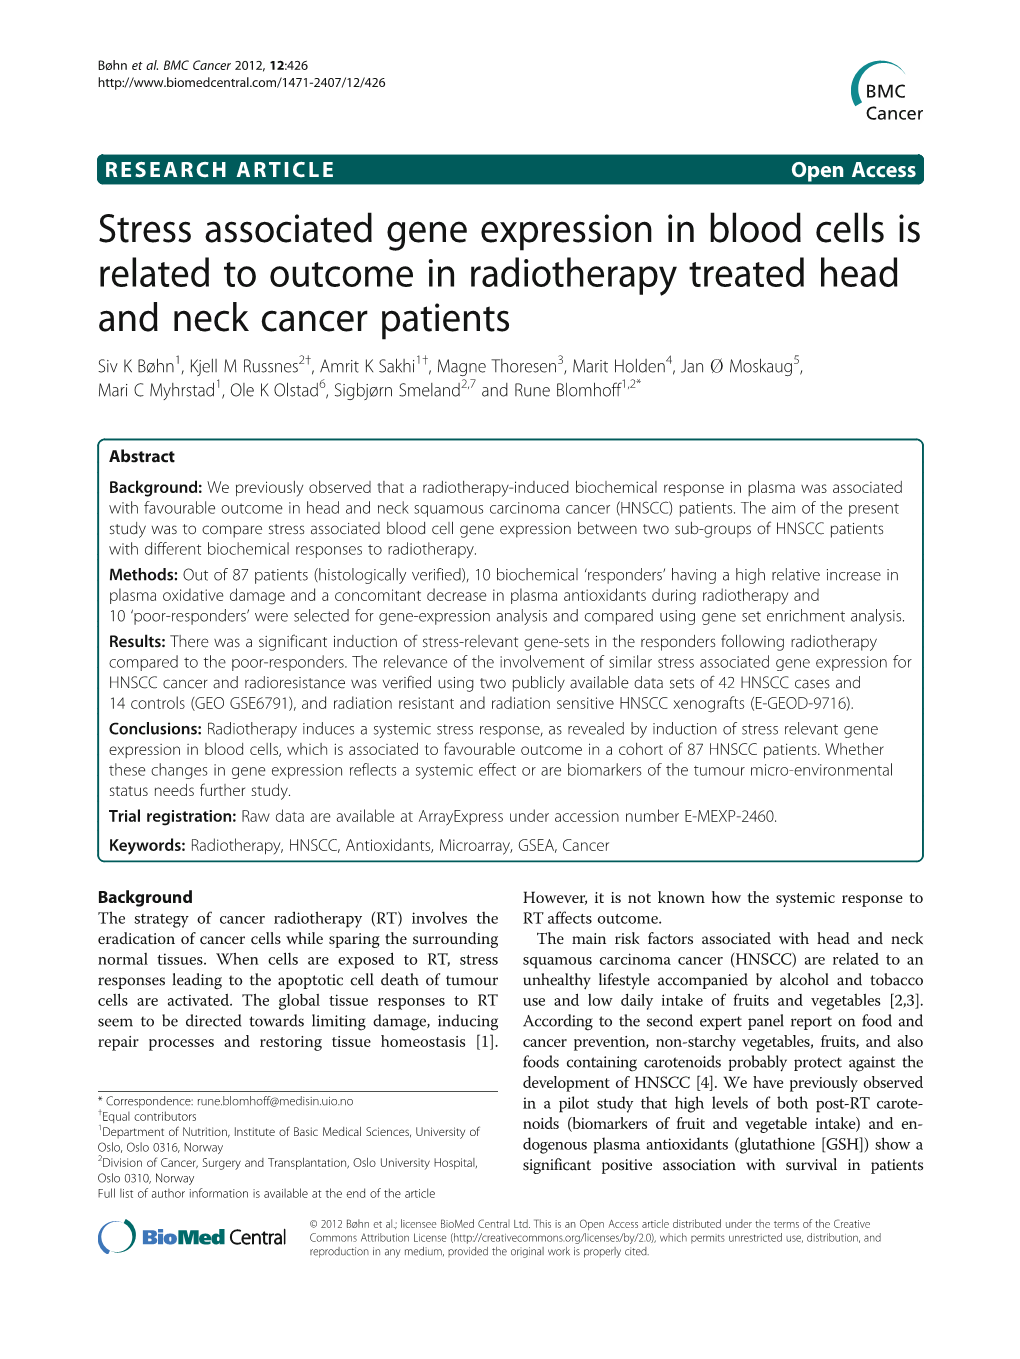 Stress Associated Gene Expression in Blood Cells Is Related to Outcome In